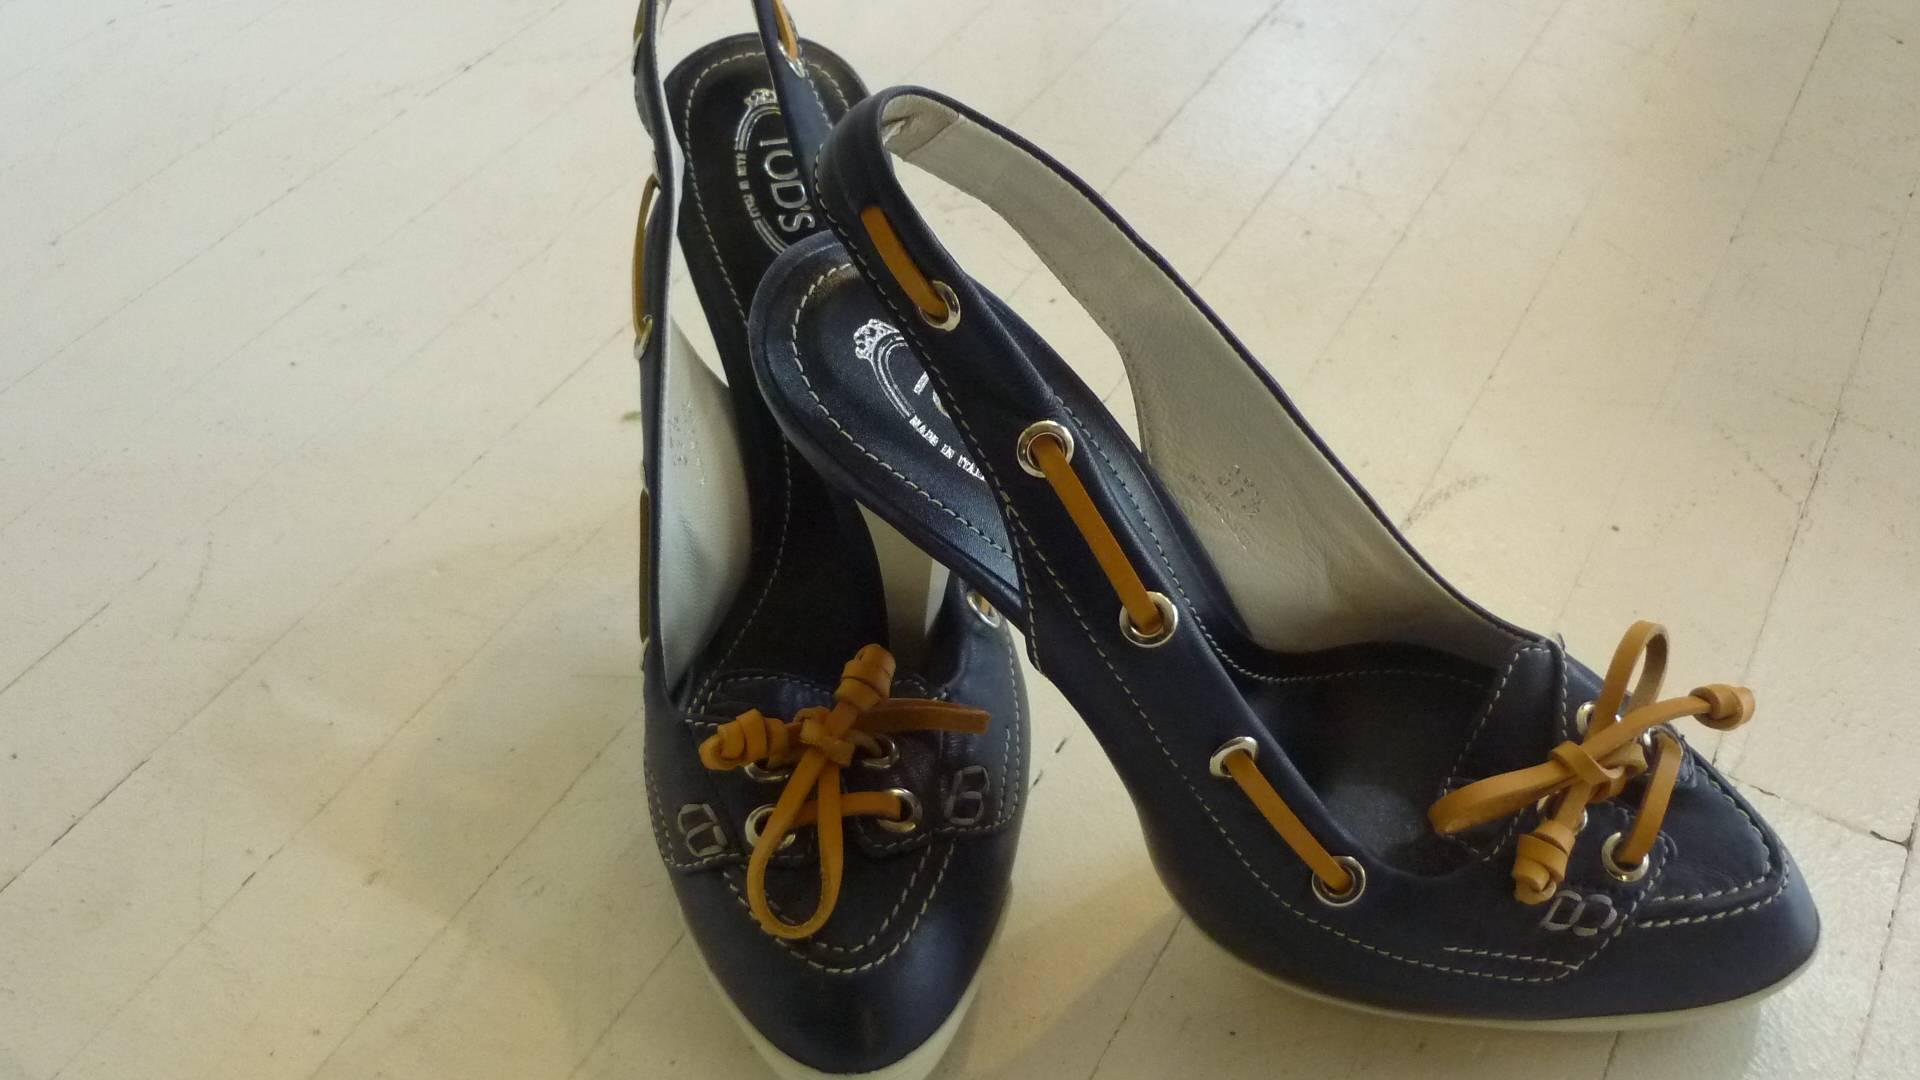 These lovely shoes have an interwoven tan leather lace which form into a gromet and bow closure. There is also white stitching throughout. The heels are 4".